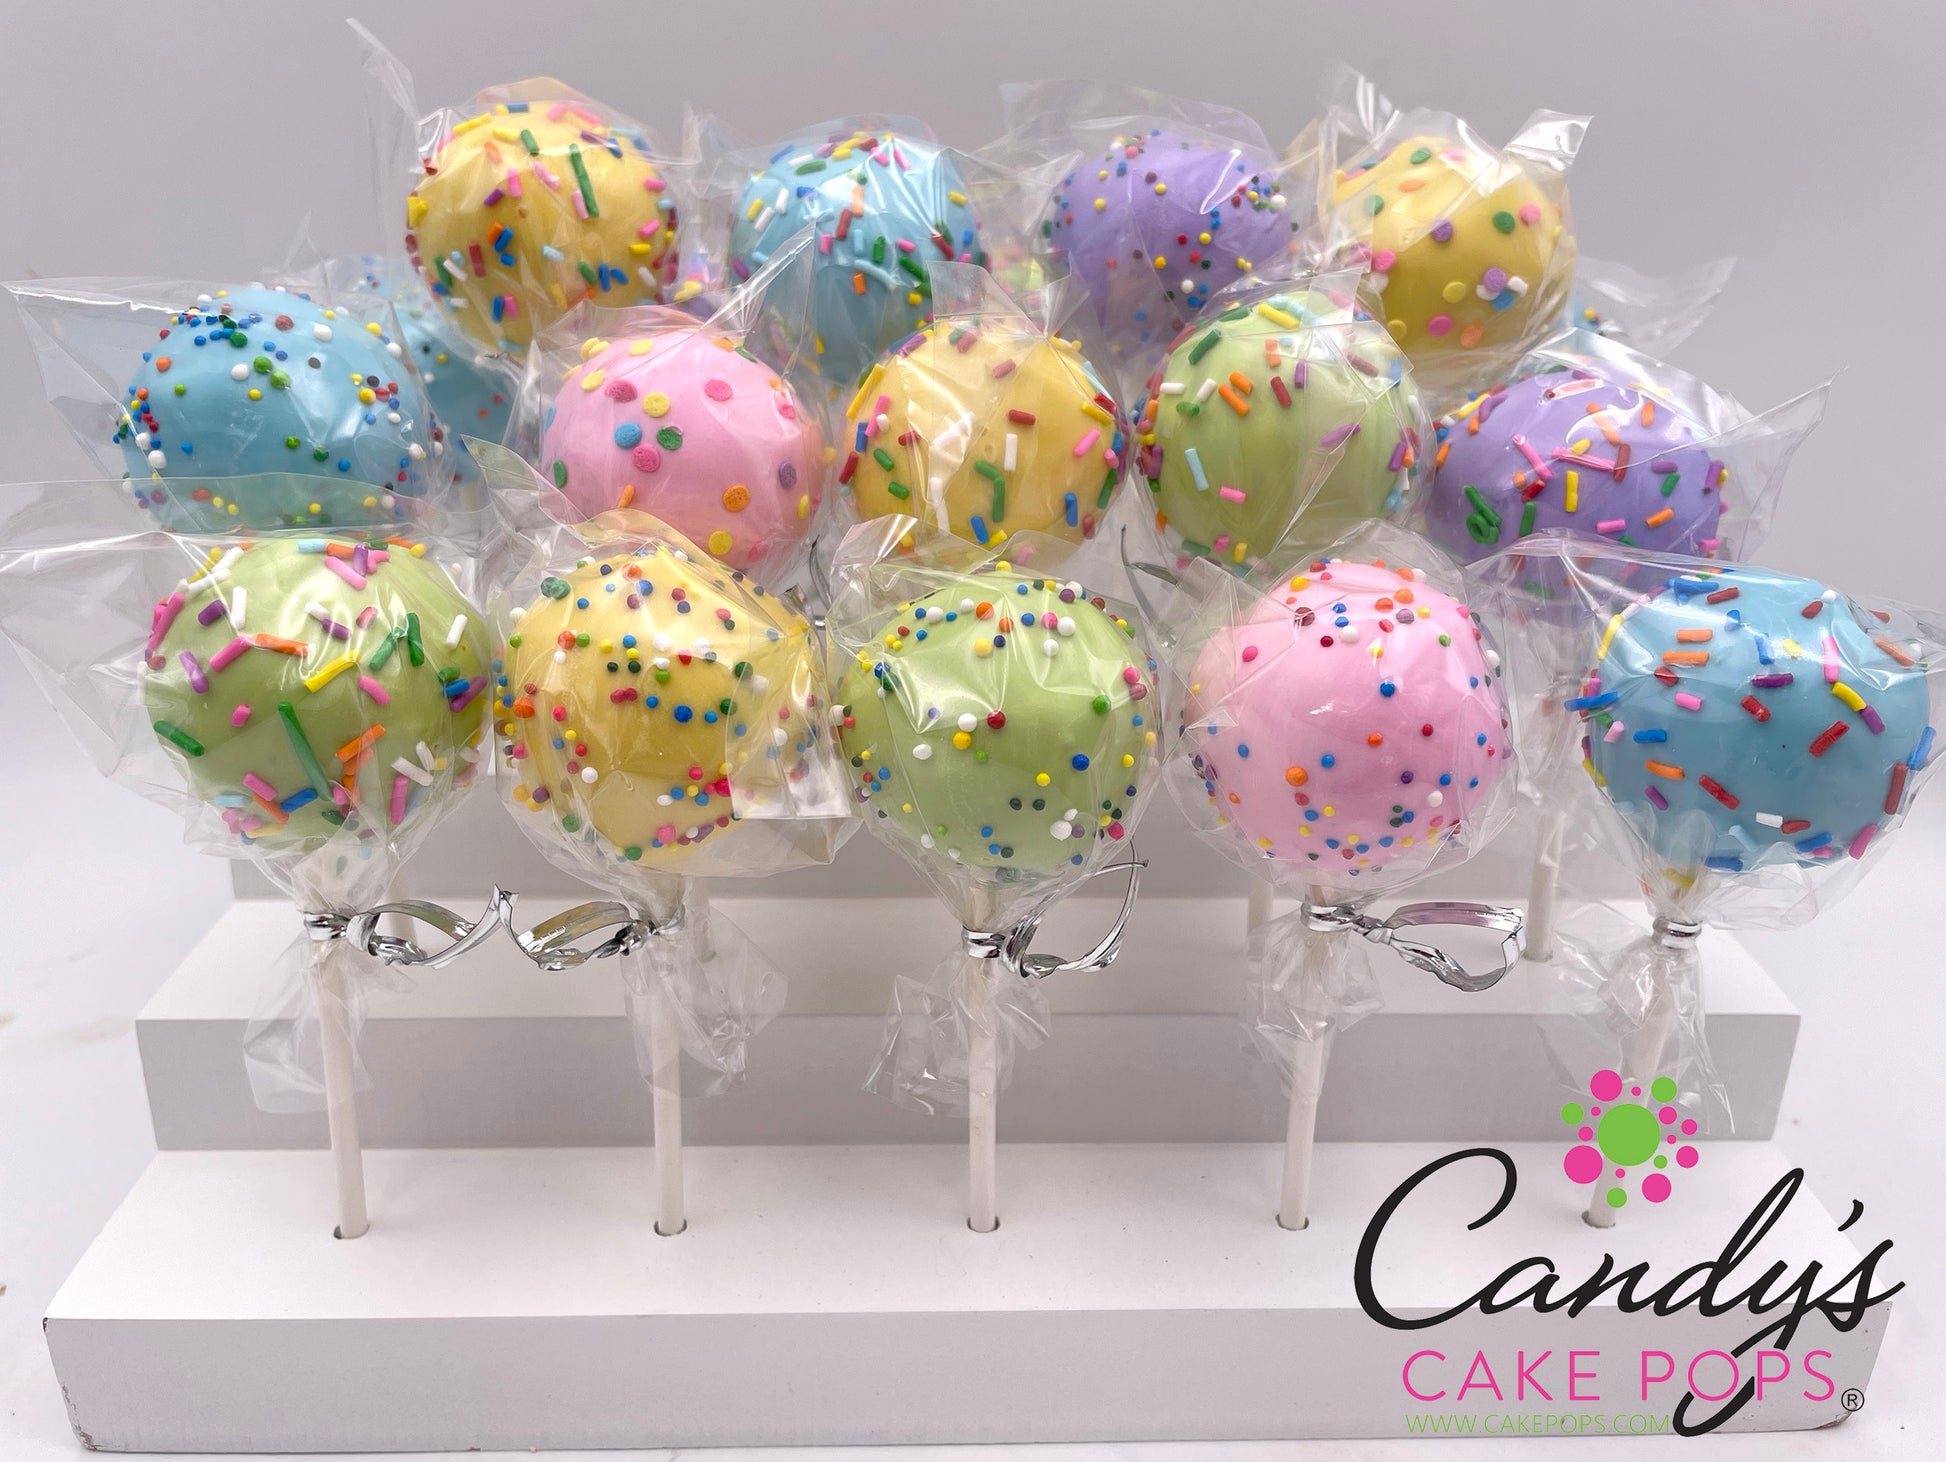 White Tiered Wooden Cake Pop Stand - Holds 24 Cake Pops (Cake Pops Not Included) - Candy's Cake Pops